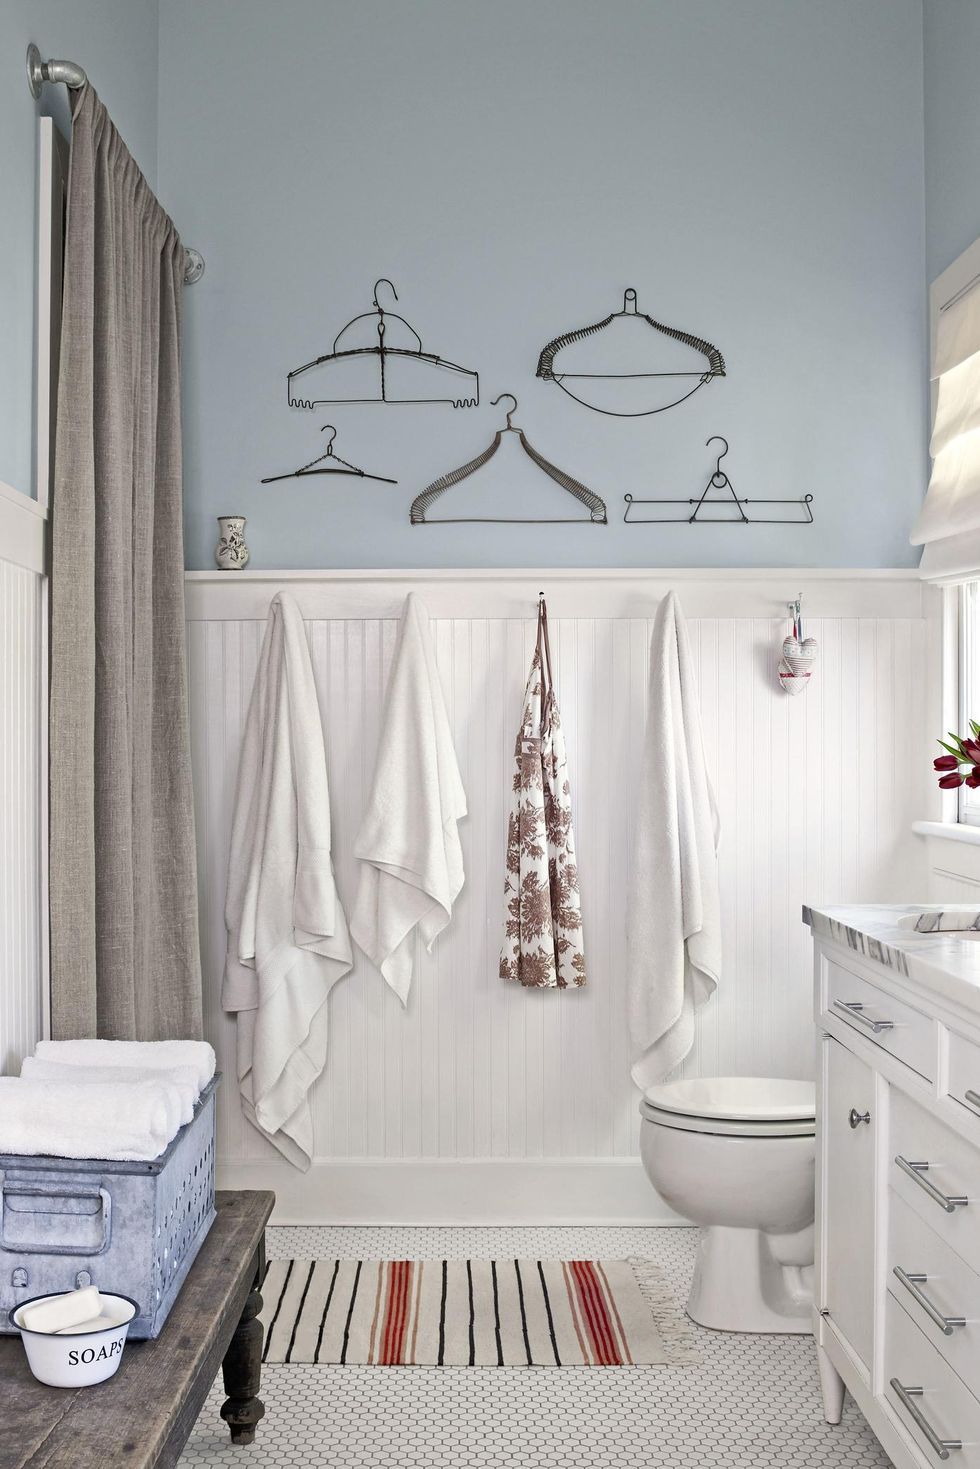 Small bathroom shower tile ideas: 10 looks that stretch space